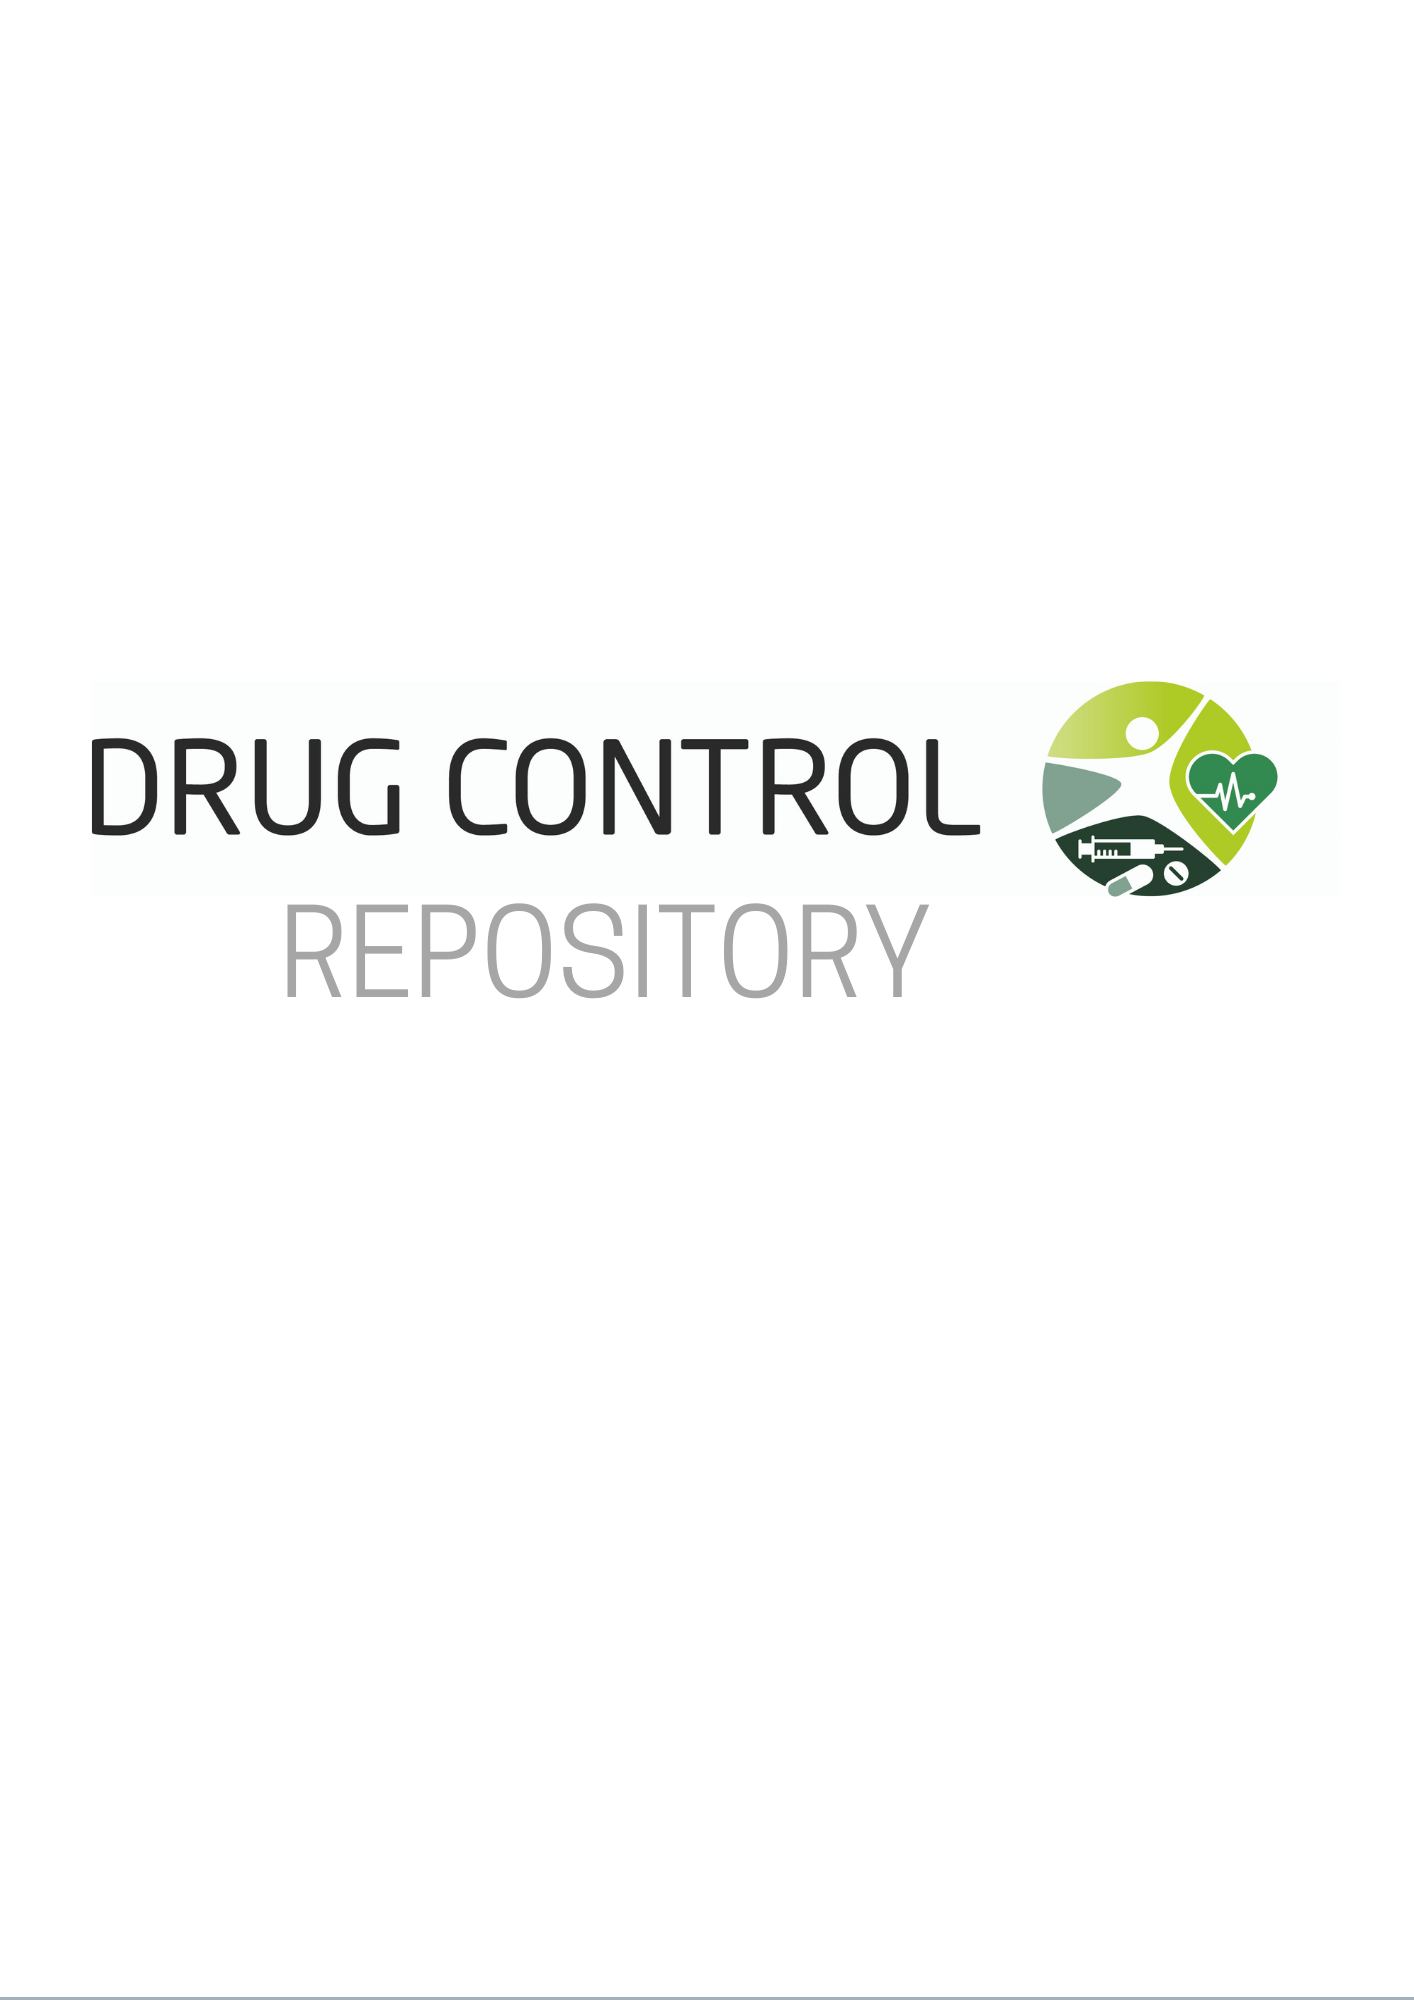 <div style="text-align: center;"><a href="https://sherloc.unodc.org/cld/v3/drugcontrolrepository/#:~:text=The%20Drug%20Control%20Repository%20is,Protocol%2C%20the%20Convention%20on%20Psychotropic">联合国毒品和犯罪问题办公室药物管制信息库</a></div>